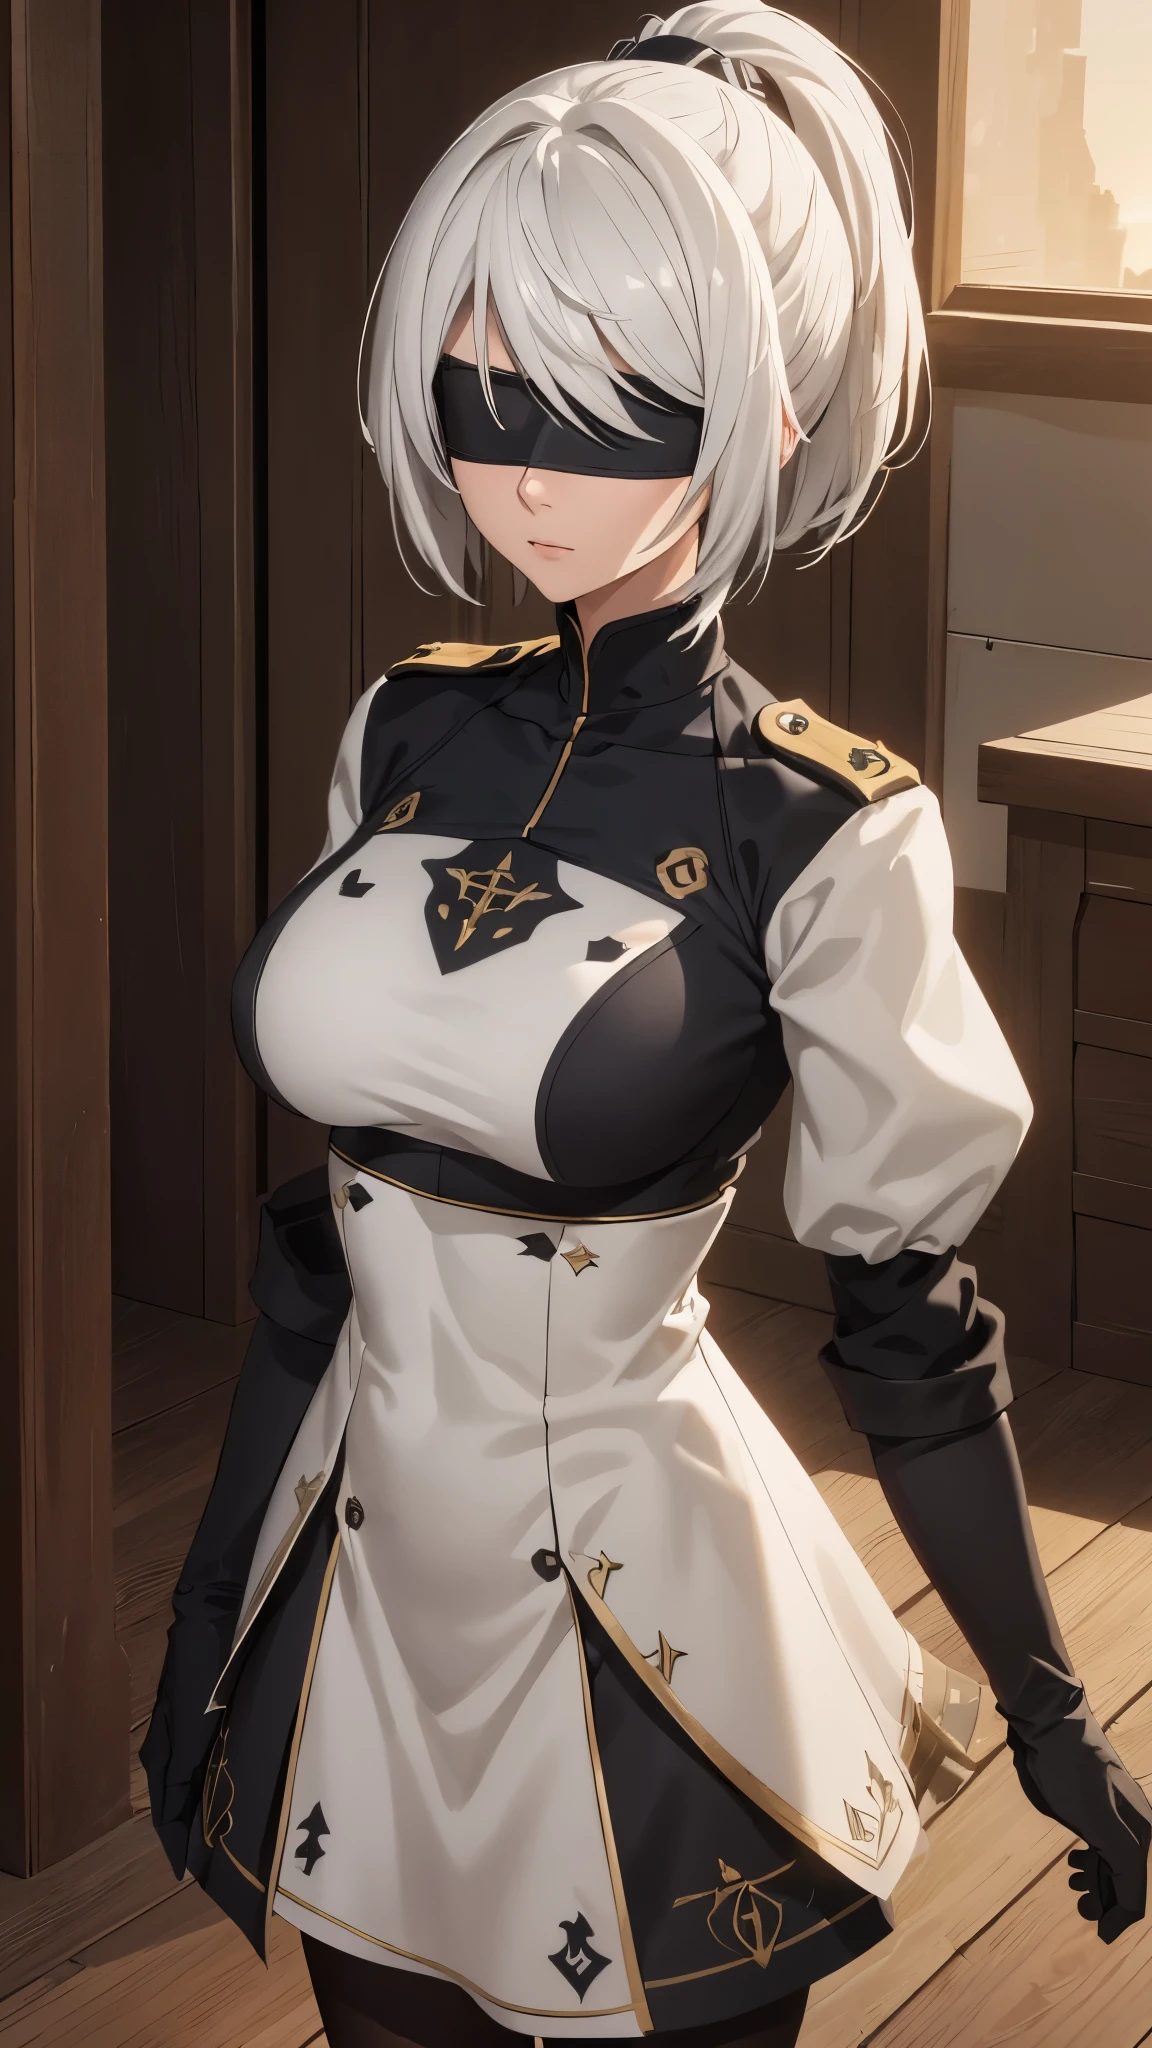 (extremely detailed CG unity 8k wallpaper), (masterpiece), (best quality), (ultra-detailed), (best illustration), (best shadow), (absurdres), 2b, 1girl, short hair, long ponytail, normal size boobs, white hair, blindfold solo, Intimidating women, admiral uniform, night, hero pose, white clothes, General Uniform, Military Uniform, Sunlight, exposed to sunlight,commander, cape, fighting, ((beautiful fantasy girl)), (Master Part: 1.2), Best Quality, High Resolution, photorealestic, photogenic, Unity 8k Wallpaper, perfect lighting, (perfect arms, perfect anatomy) beatiful face, intricate details, lifelike details, the anime, The Perfect Girl, perfect details, ultra HD |, 8k, Professional photo(extremely detailed CG unity 8k wallpaper), (masterpiece), (best quality), (ultra-detailed), (best illustration), (best shadow), (absurdres), 2b, 1girl, short hair, short ponytail, normal size , white hair, blindfold solo, Intimidating women, admiral uniform, night, hero pose, white clothes, General Uniform, Military Uniform, Sunlight, exposed to sunlight, commander, black clothes, sunkissed, sunset background